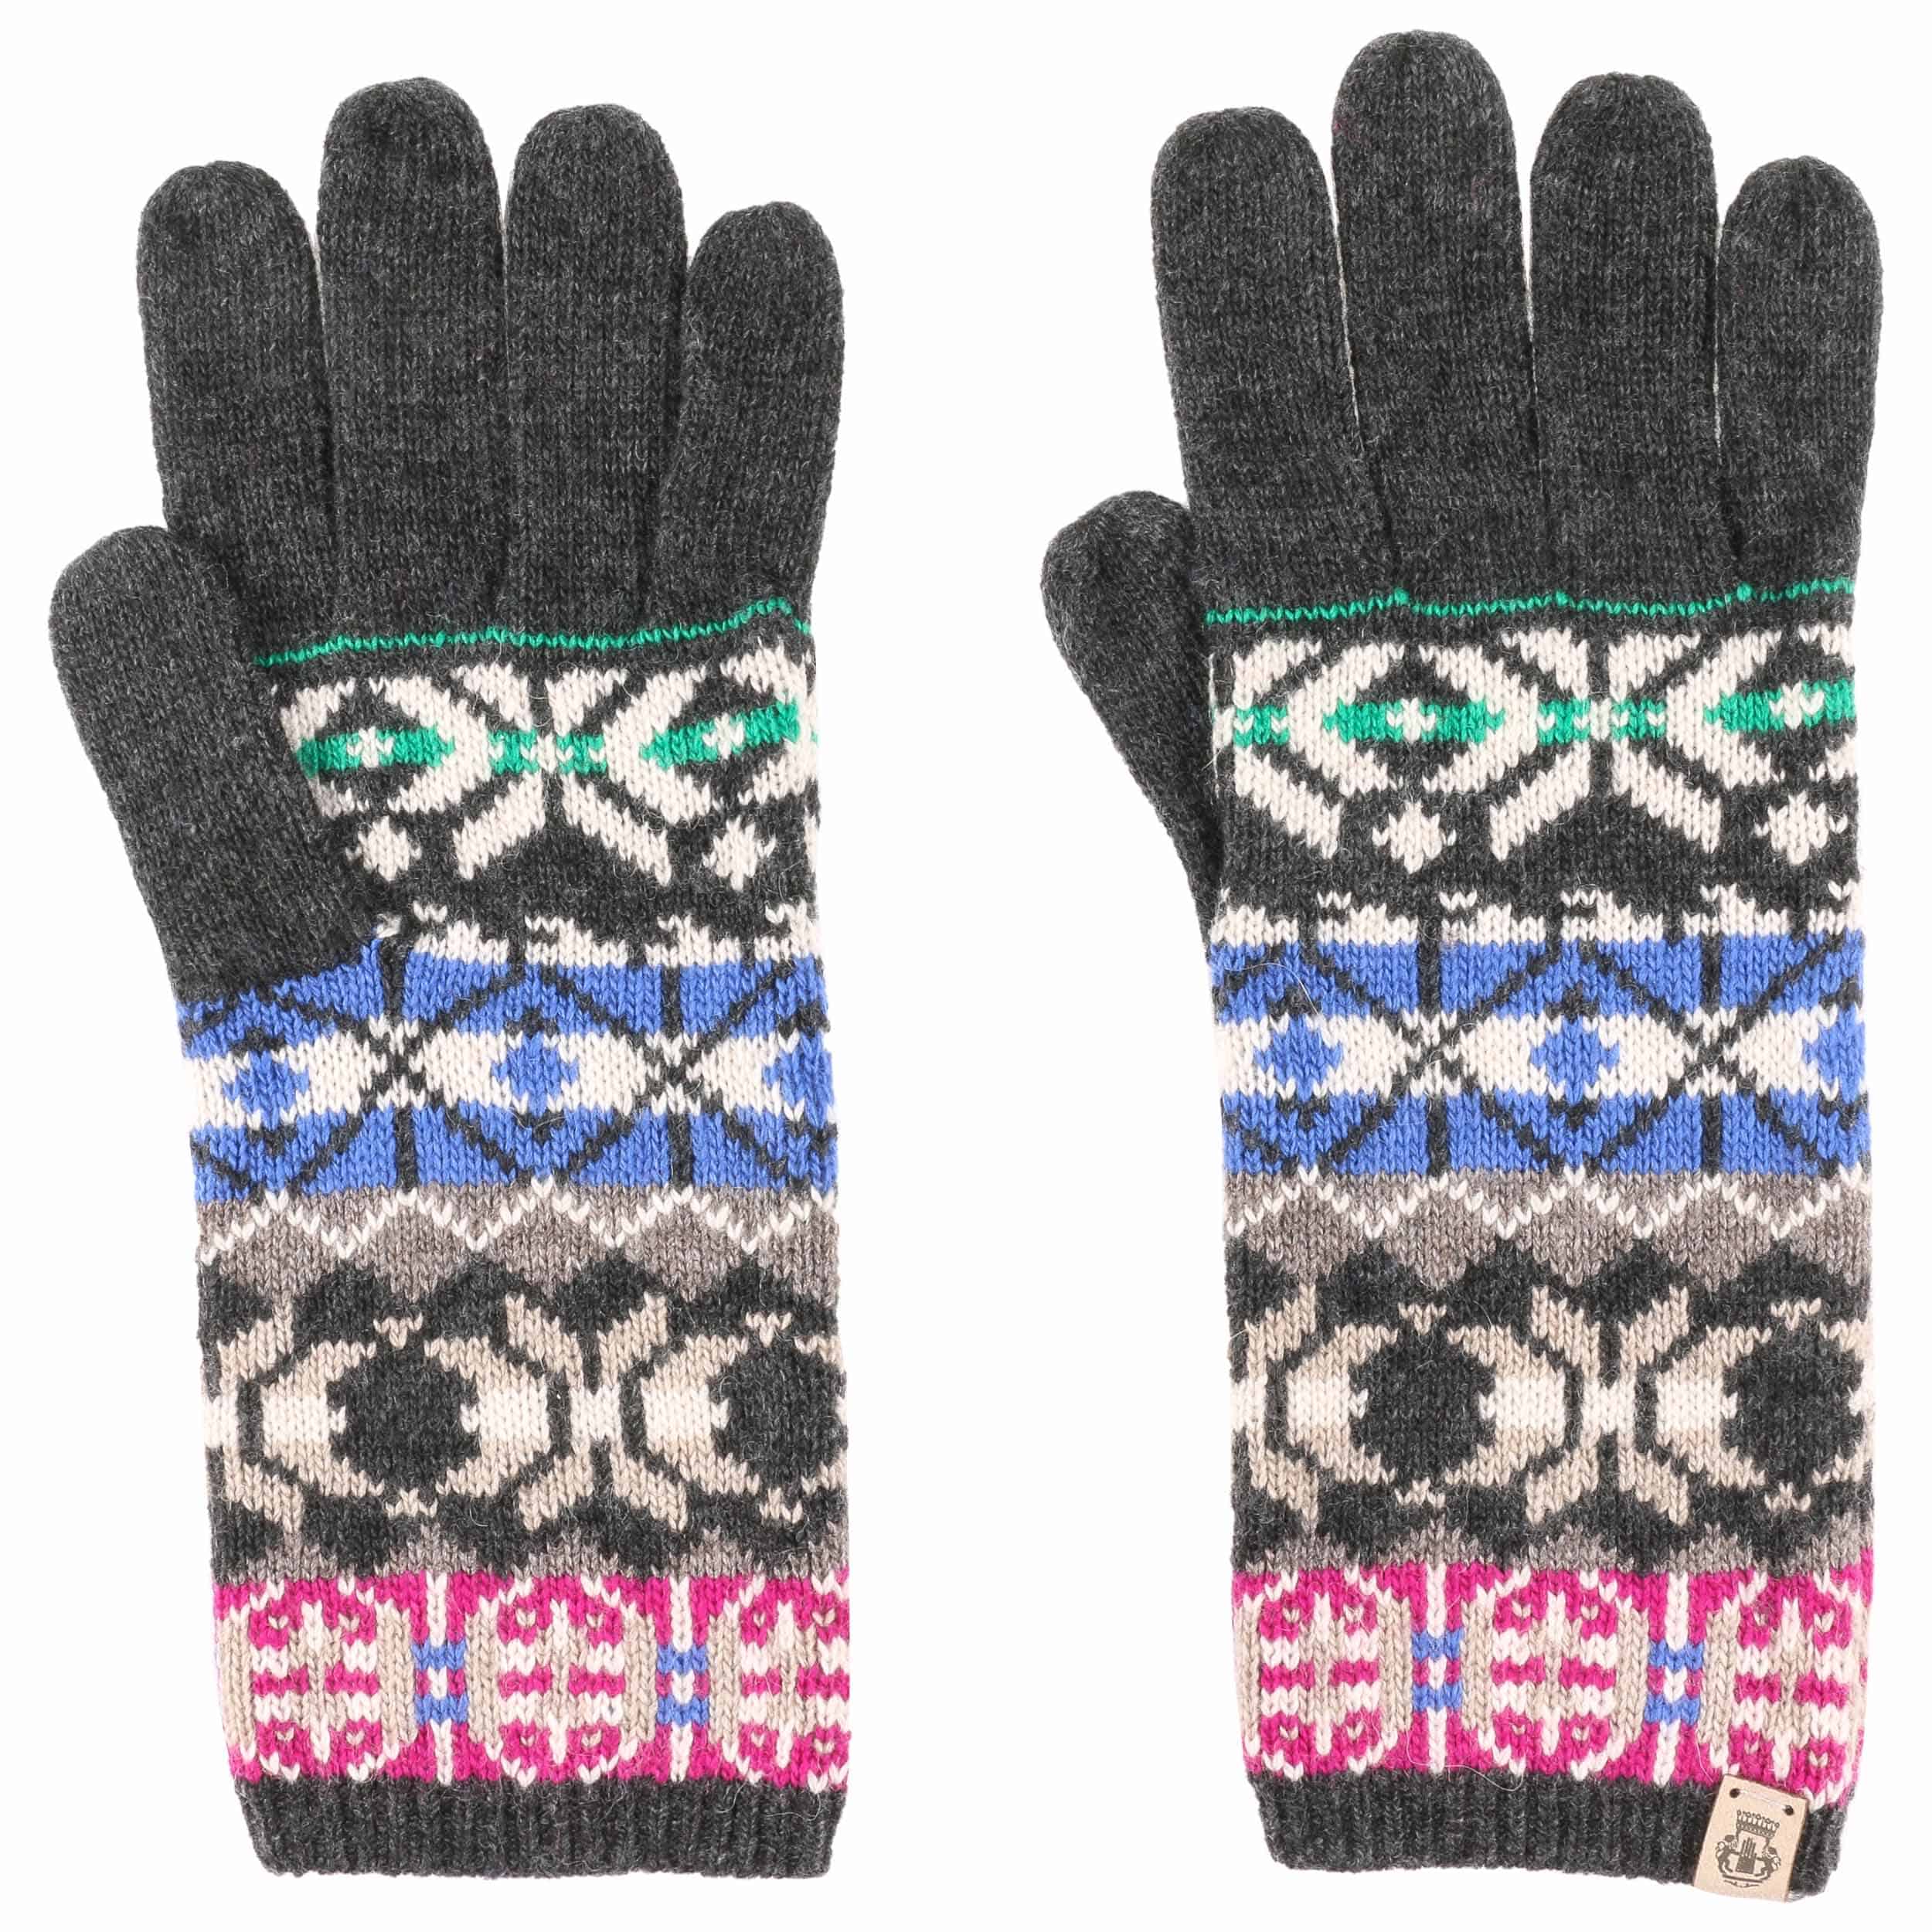 Jacquard Knit Gloves by Roeckl - 42,95